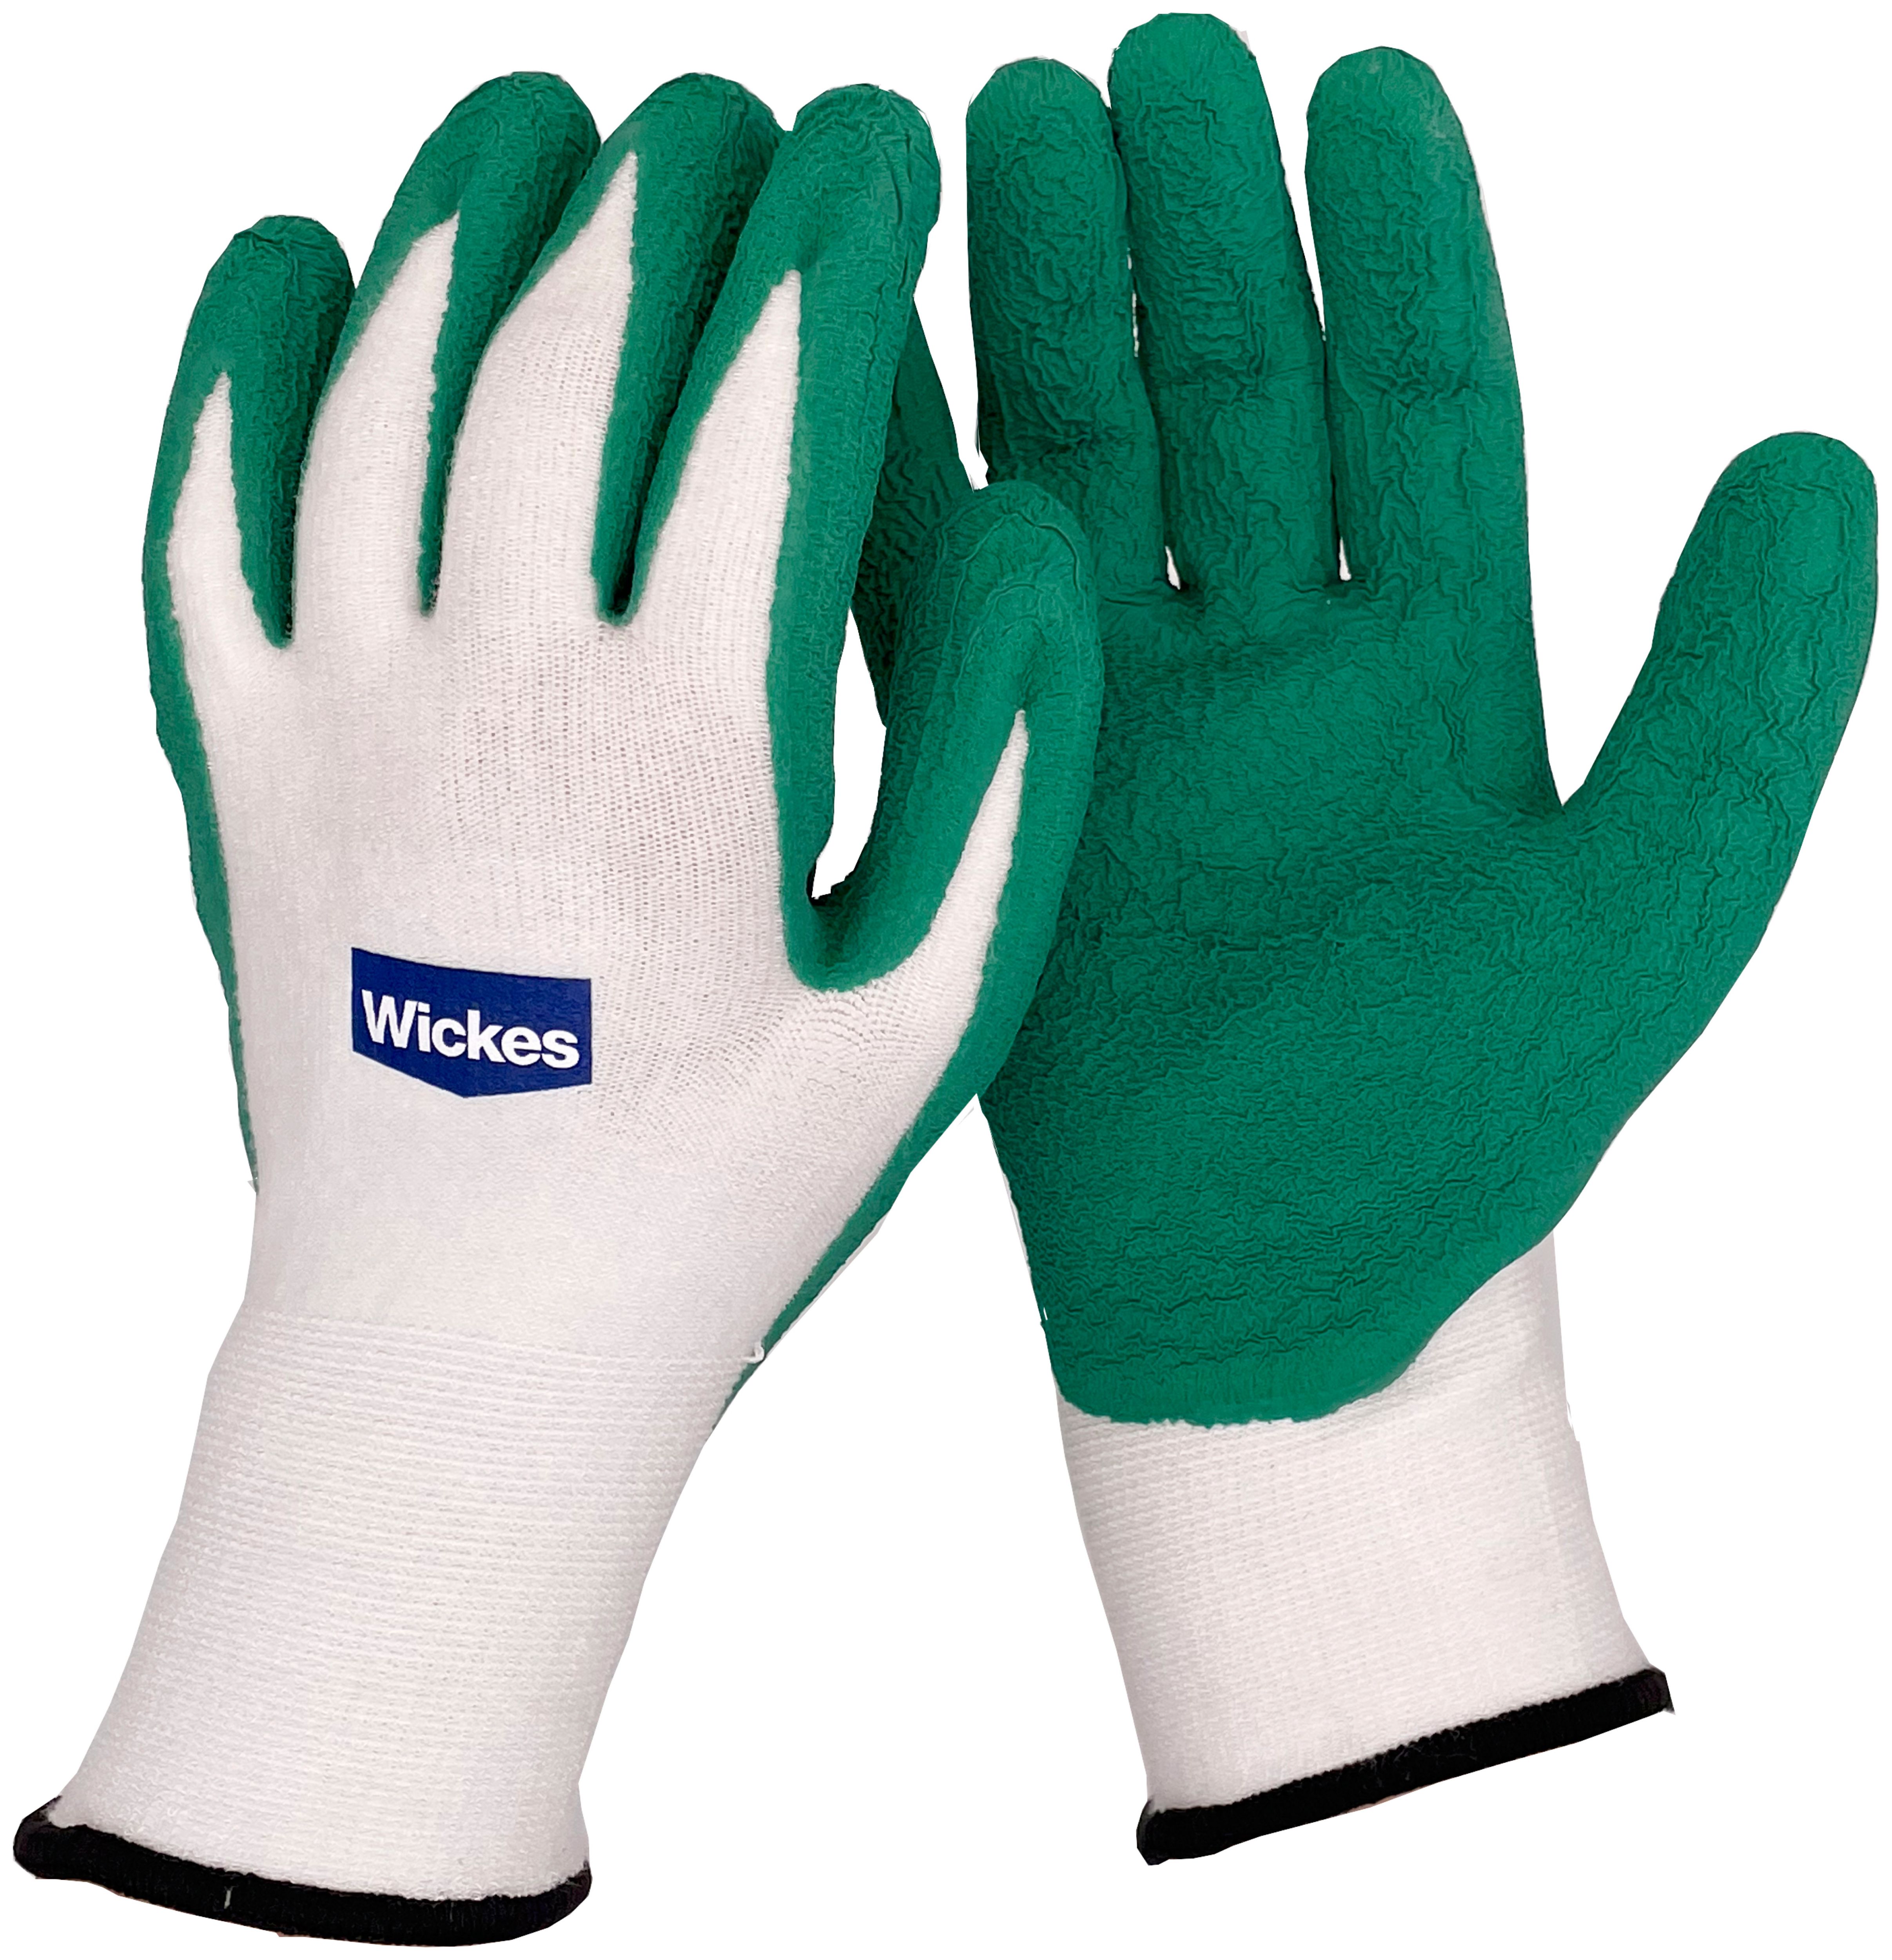 Image of Wickes Bamboo Flexible Gardening Glove - Large